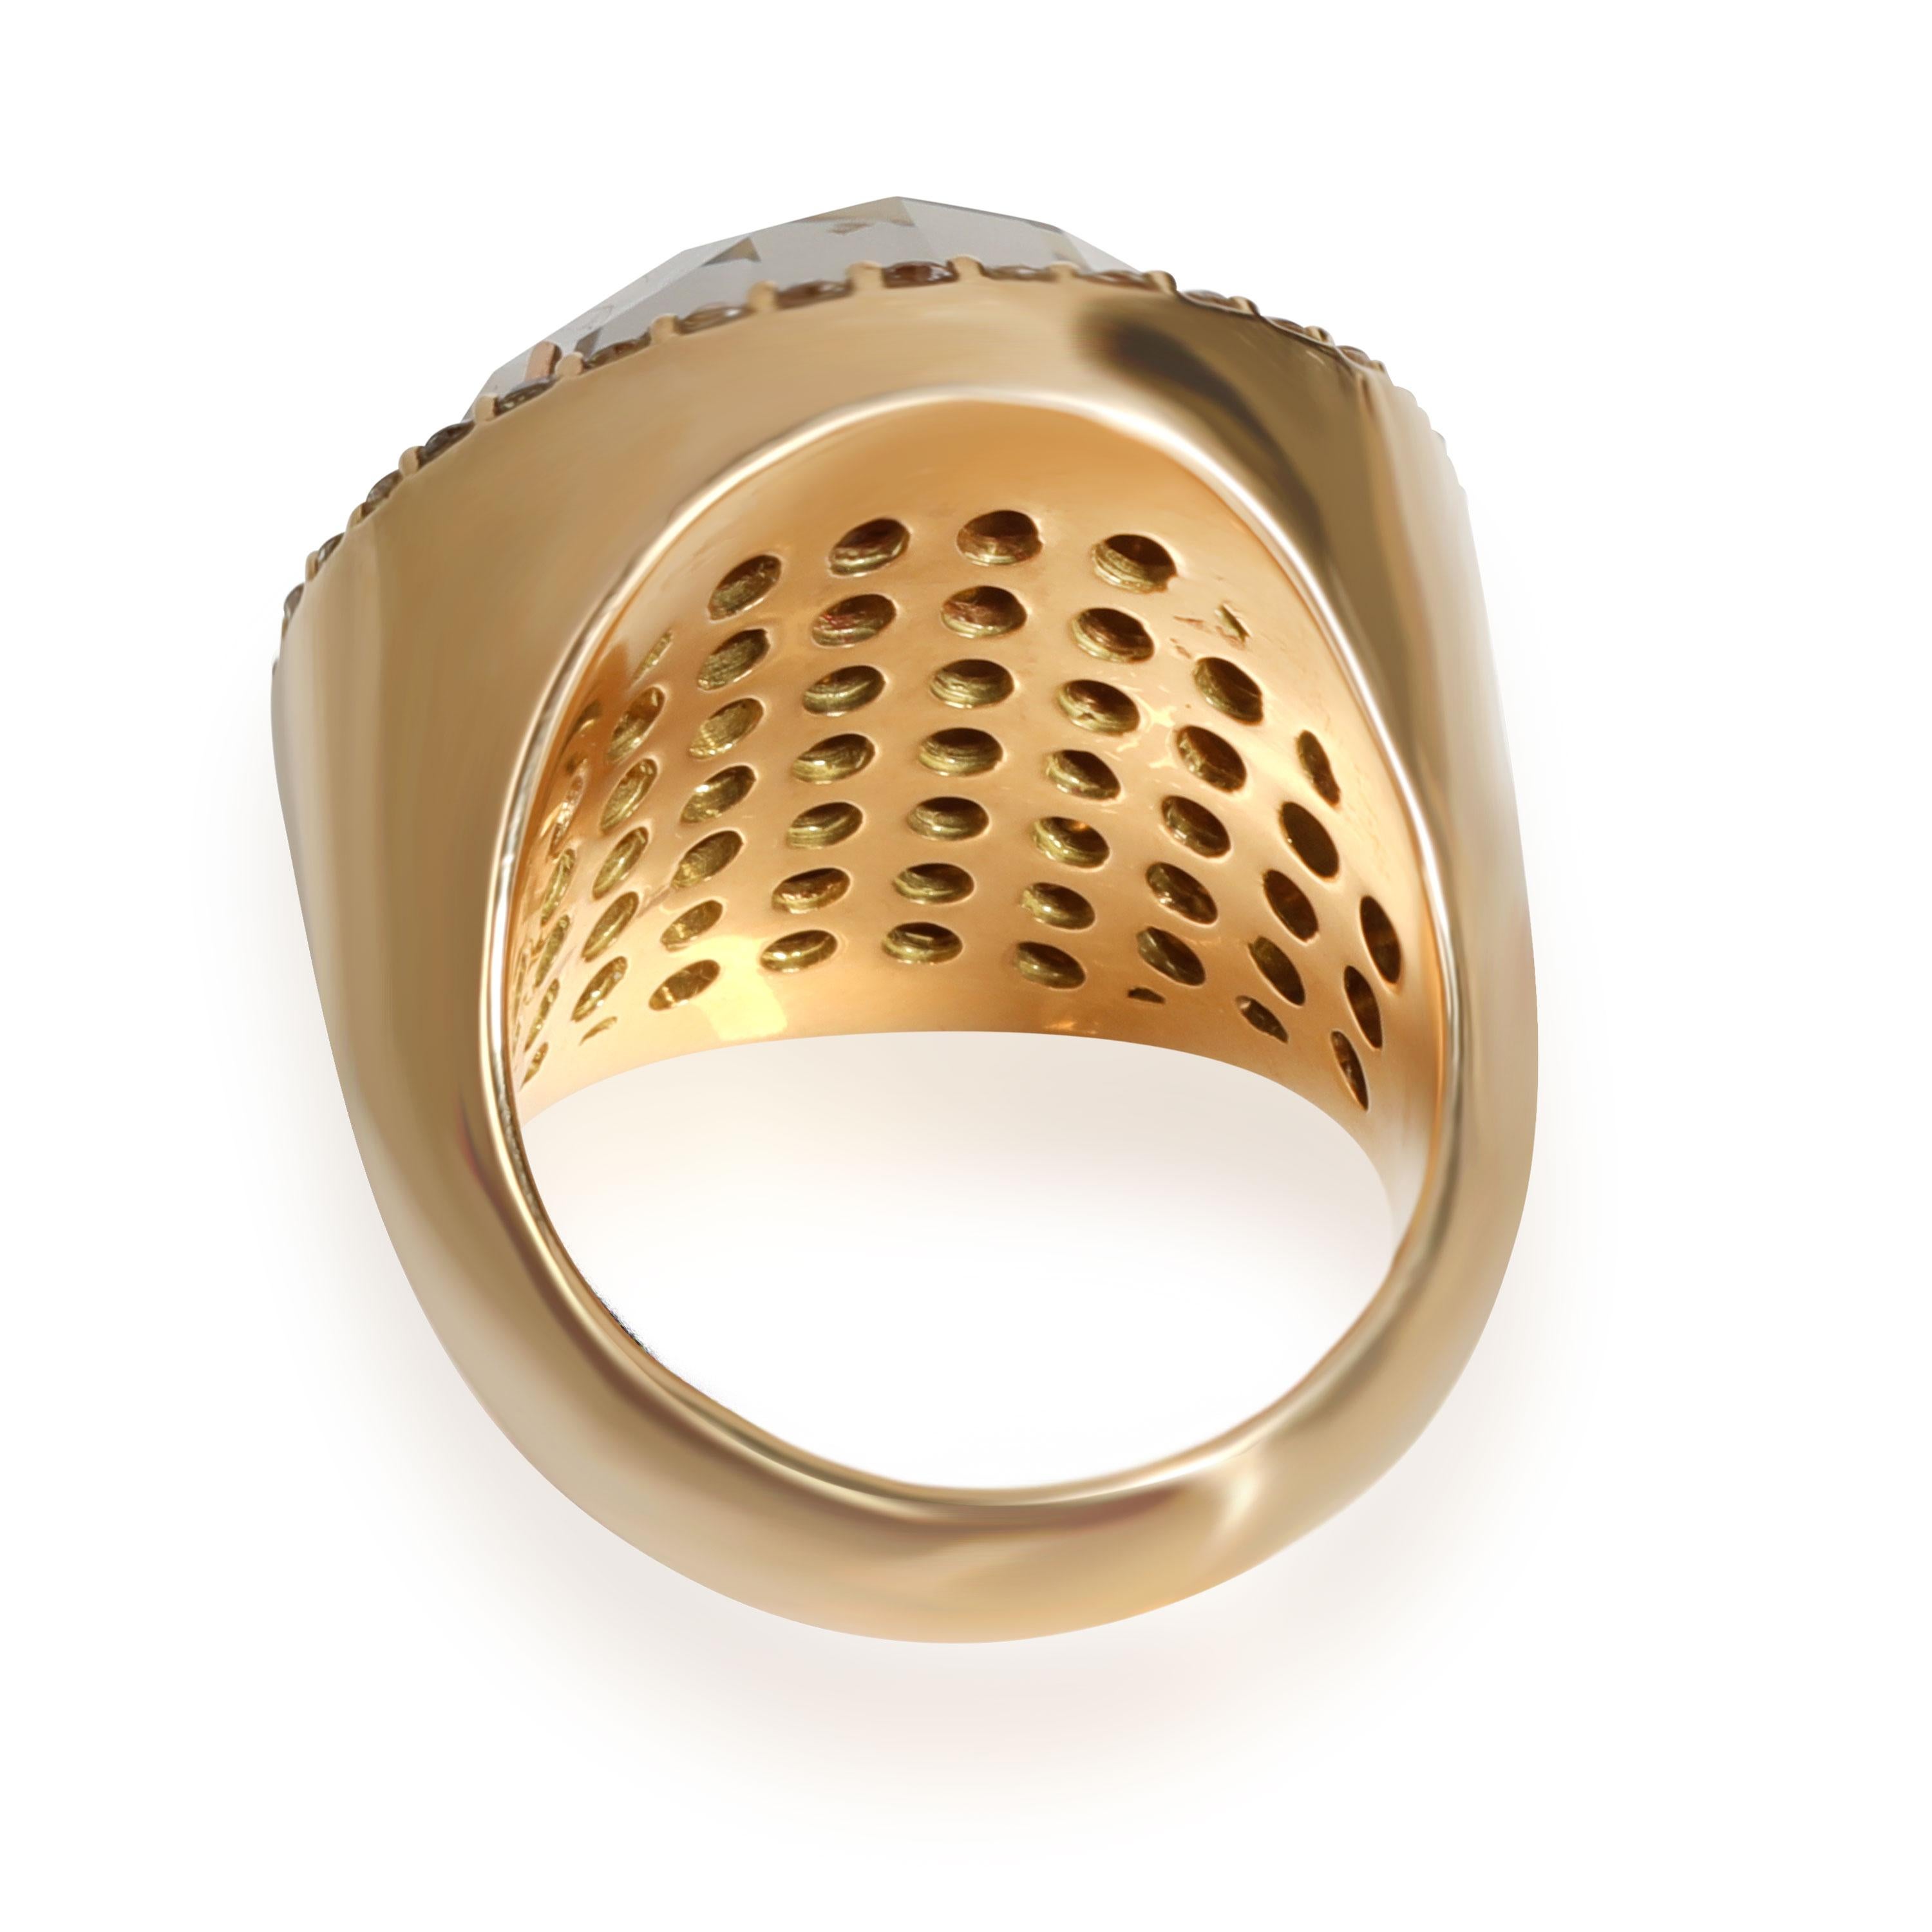 
Roberto Coin Quartz Diamond Doublet Ring in 18K Yellow Gold 0.95 ctw

PRIMARY DETAILS
SKU: 111320
Listing Title: Roberto Coin Quartz Diamond Doublet Ring in 18K Yellow Gold 0.95 ctw
Condition Description: Retails for 5,100 USD. In excellent